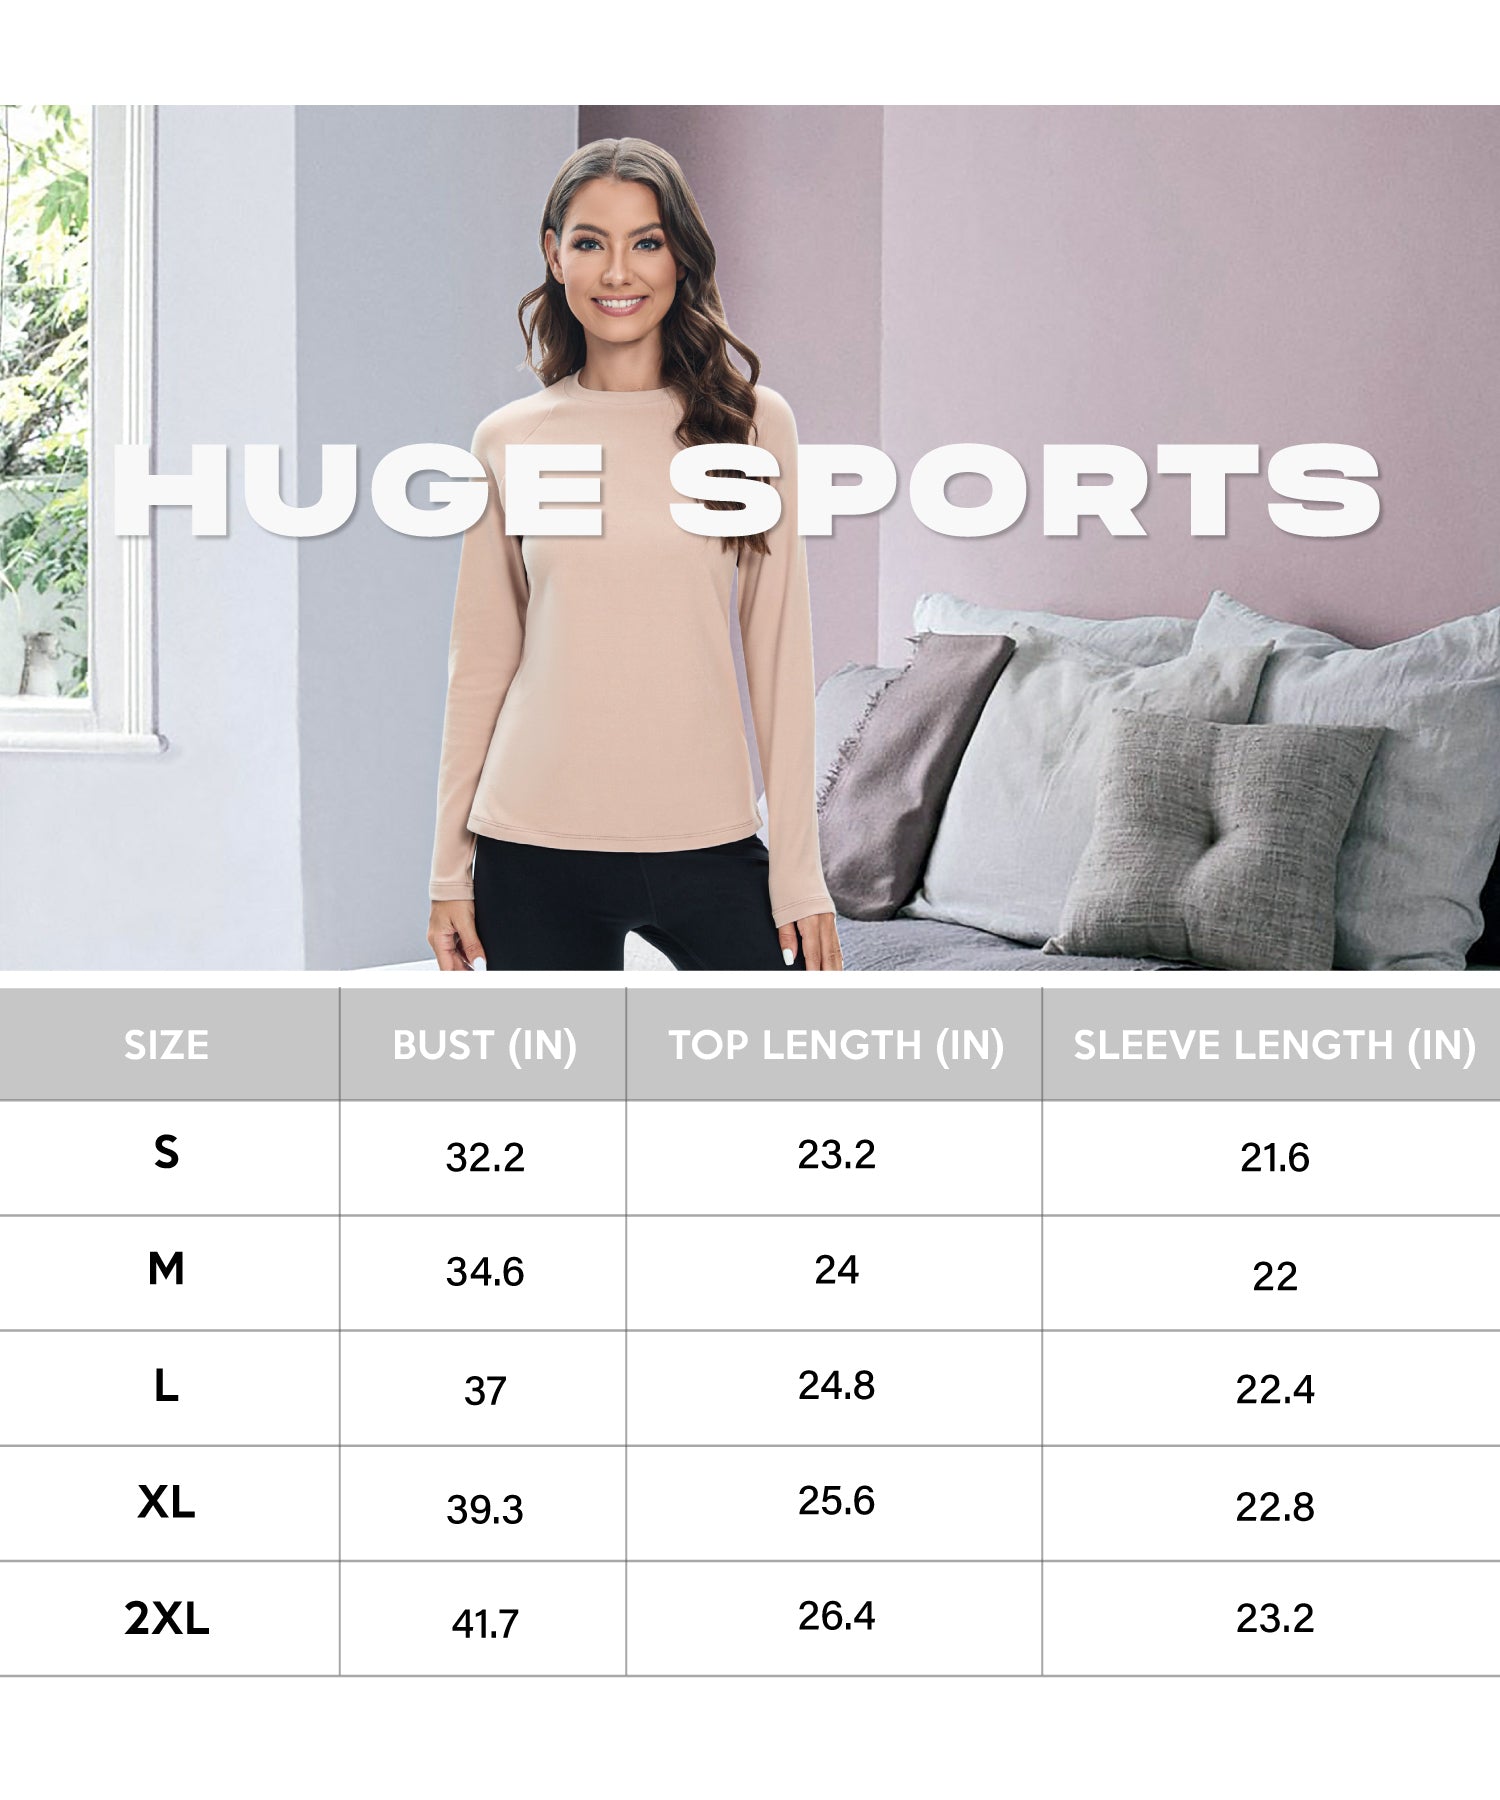 HUGE SPORTS Women Thermal Fleece Top Shirts Workout Pullover Tops